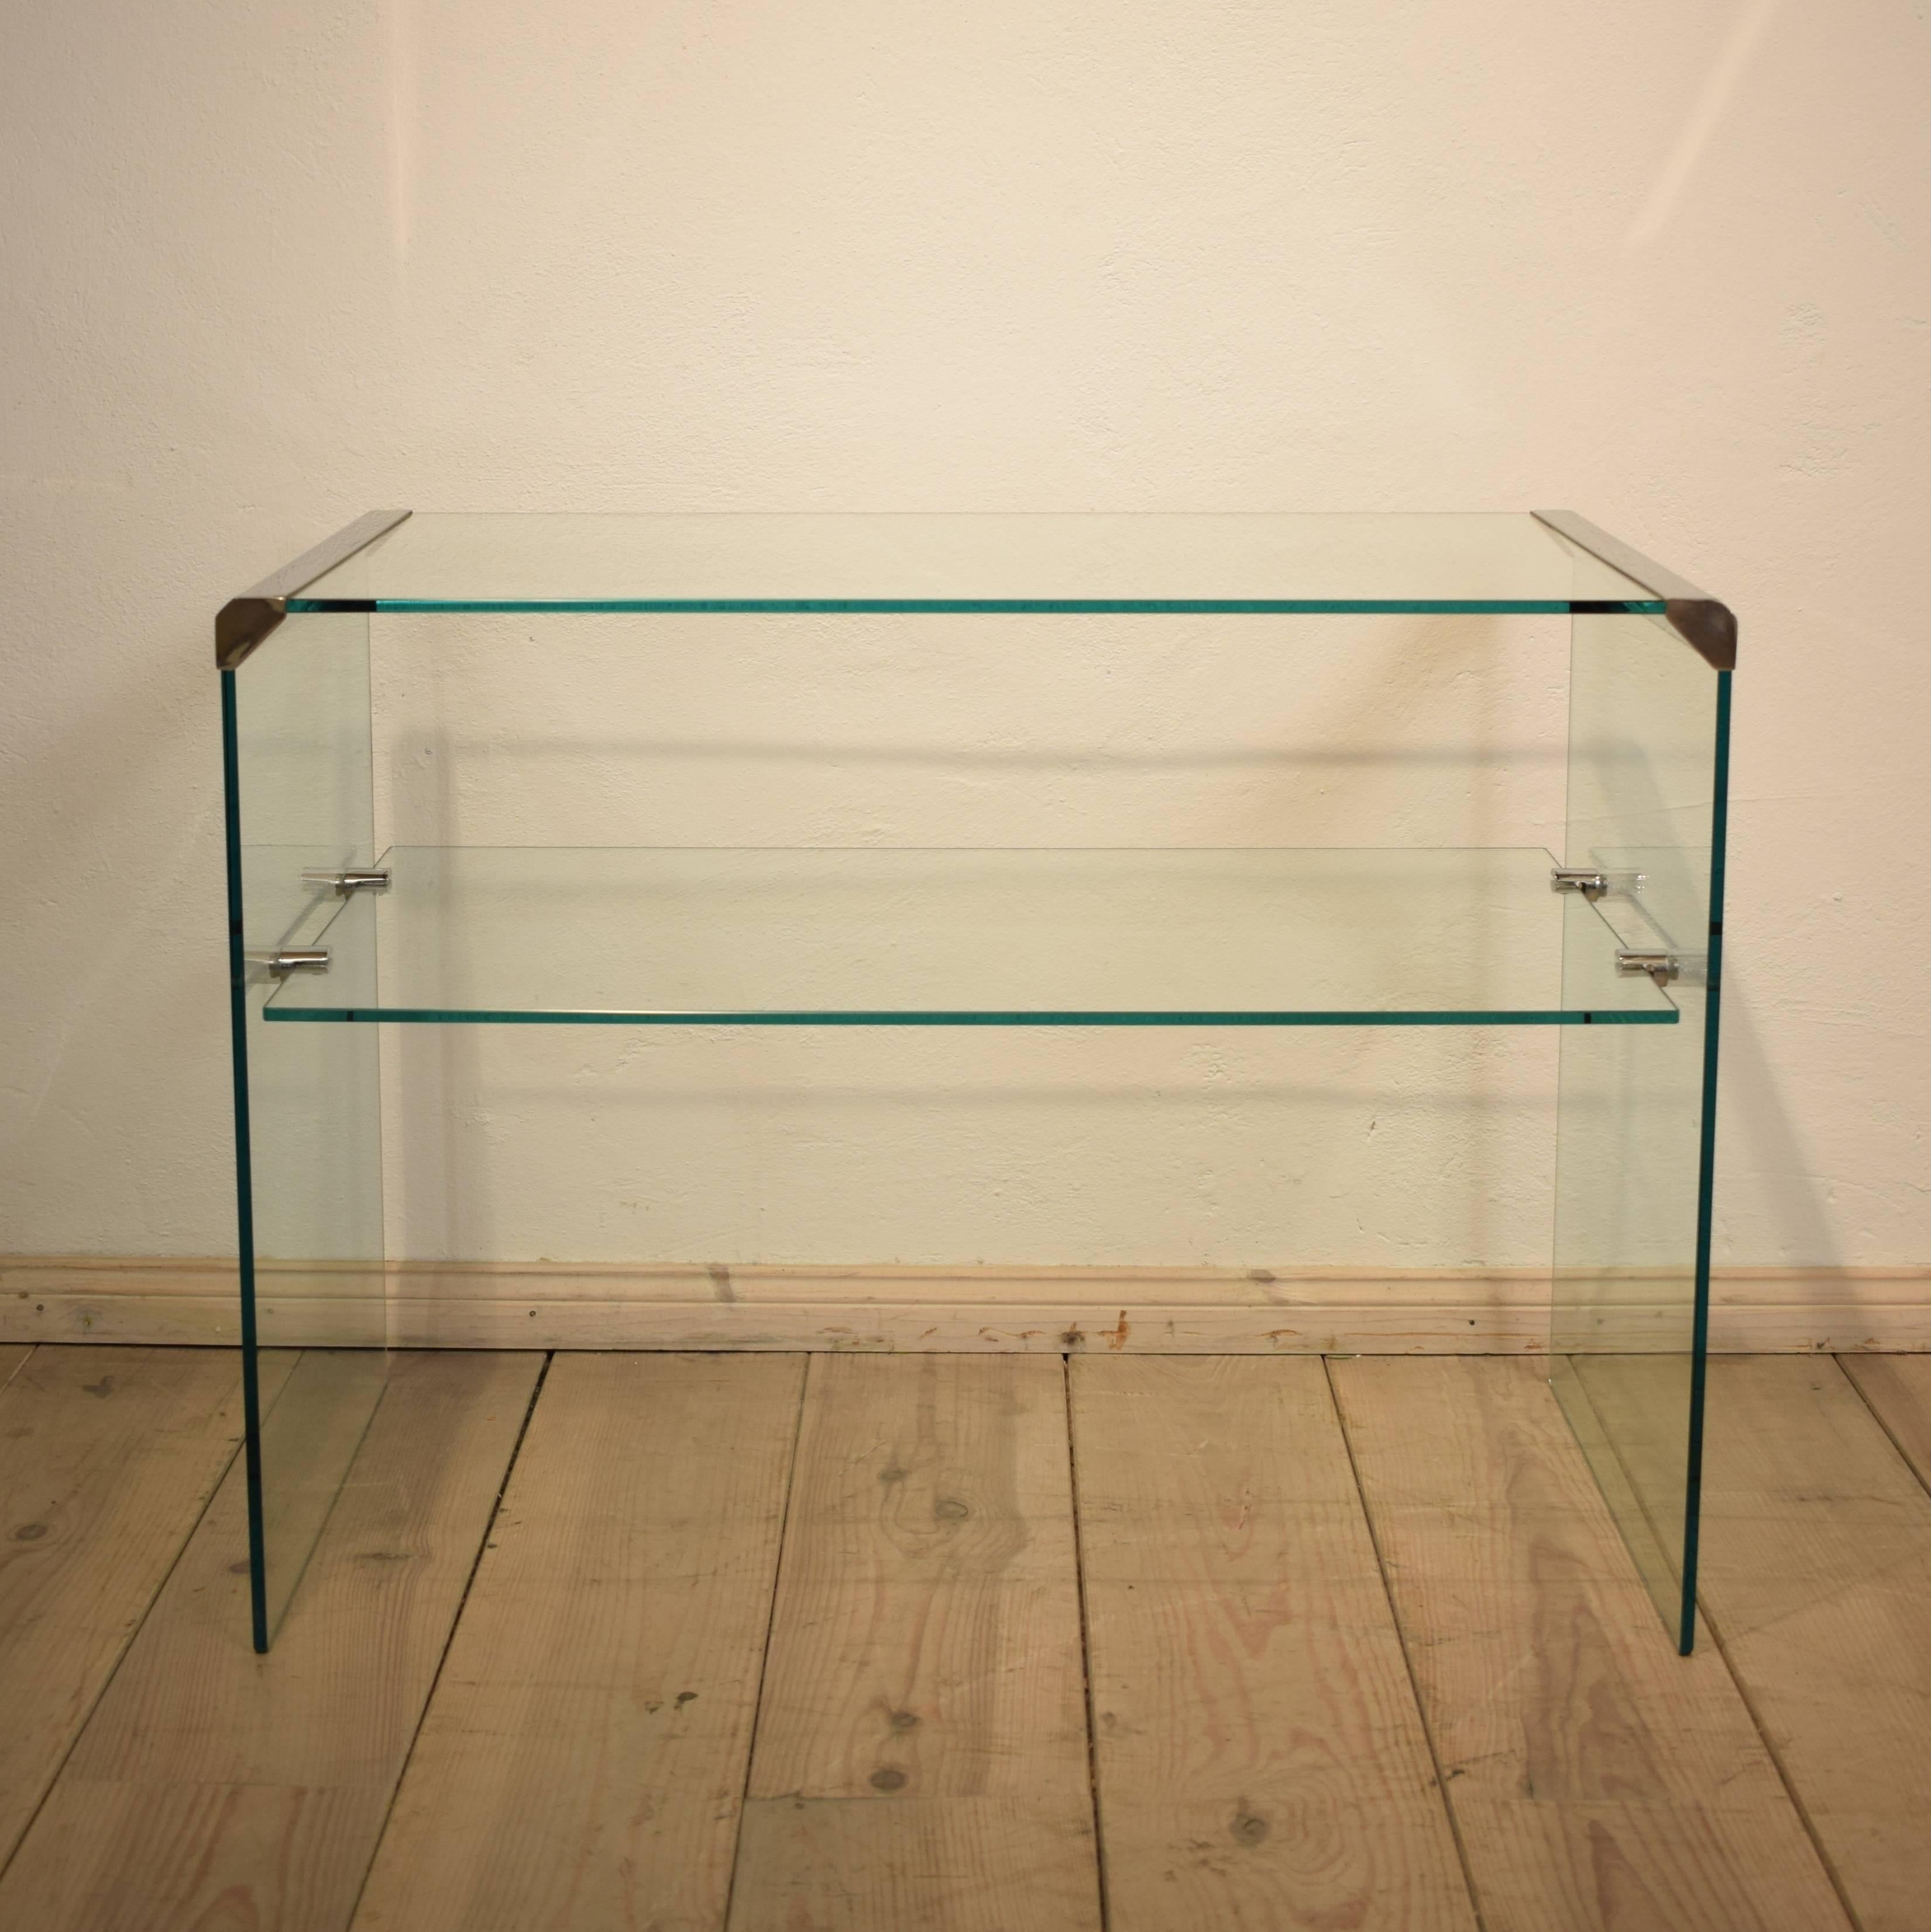 This Italian glass console table from Pierangelo Gallott. Was produced in the 1980s by Gallotti & Radice. The console has thick tempered transparent glass and has stainless steel edges. 
The console is in very good Vintage condition and fit to